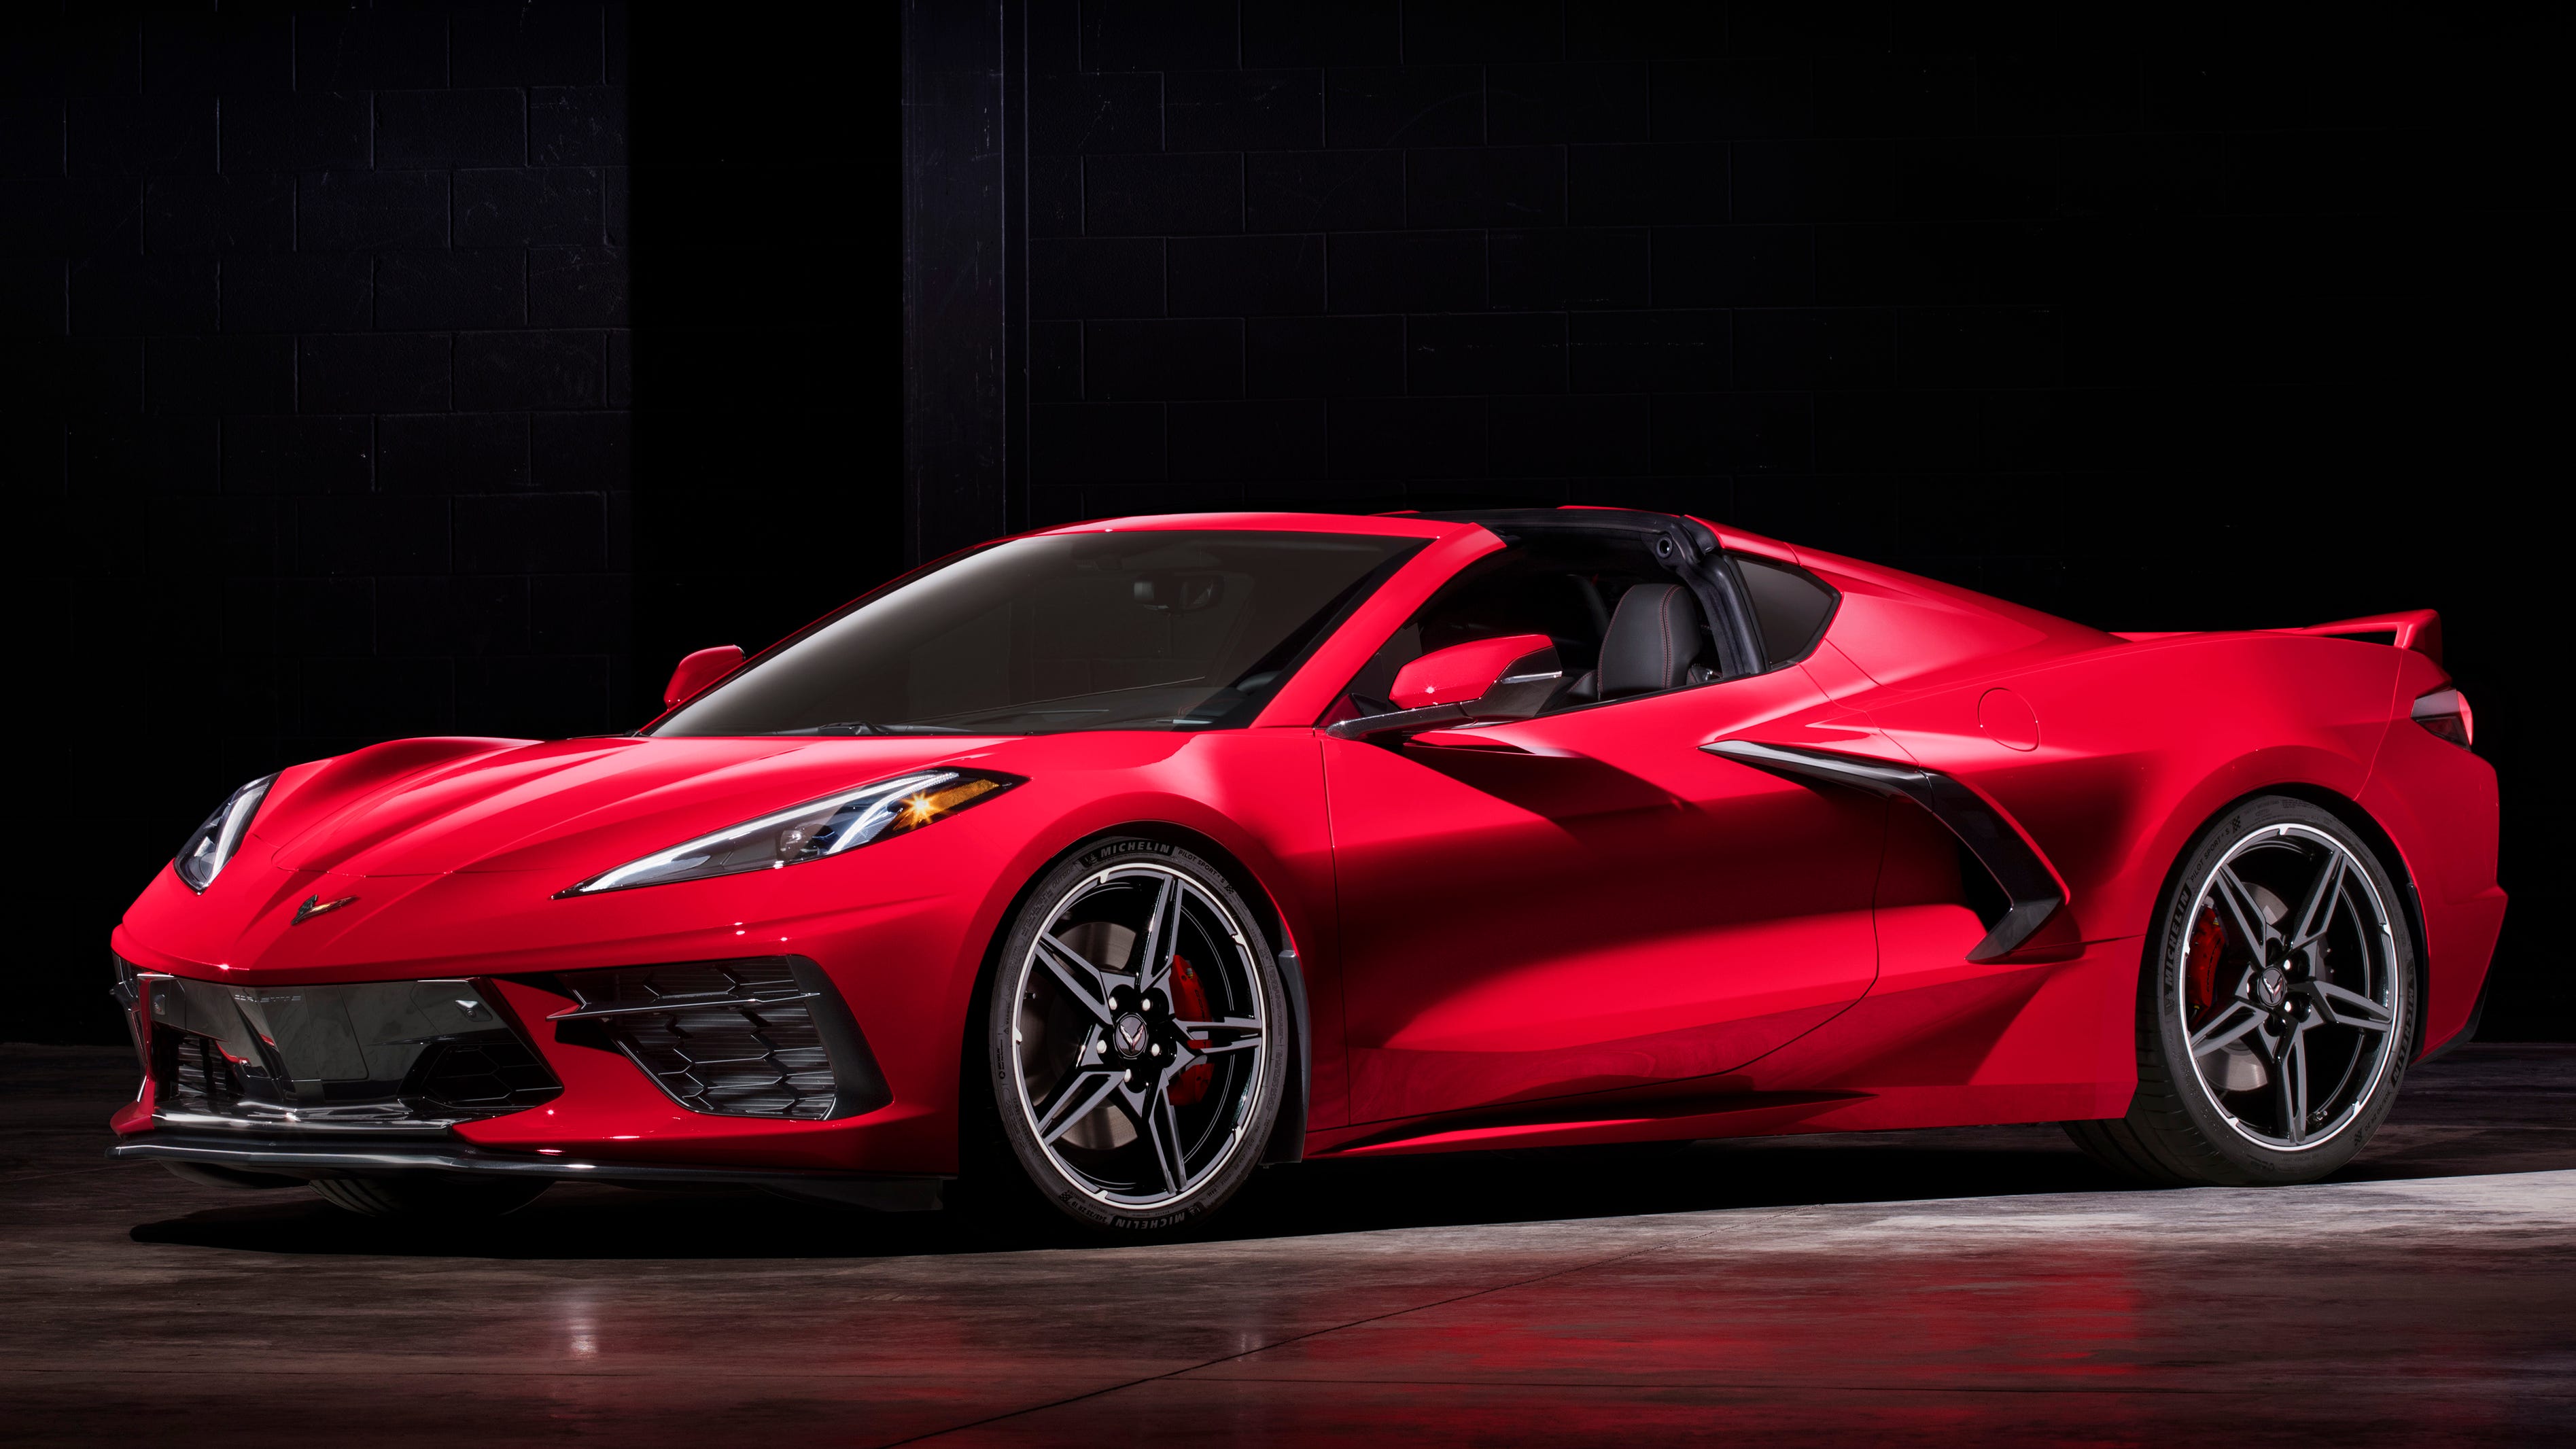 Free Press Car of the Year: 2020 Corvette delivers on decades of promises